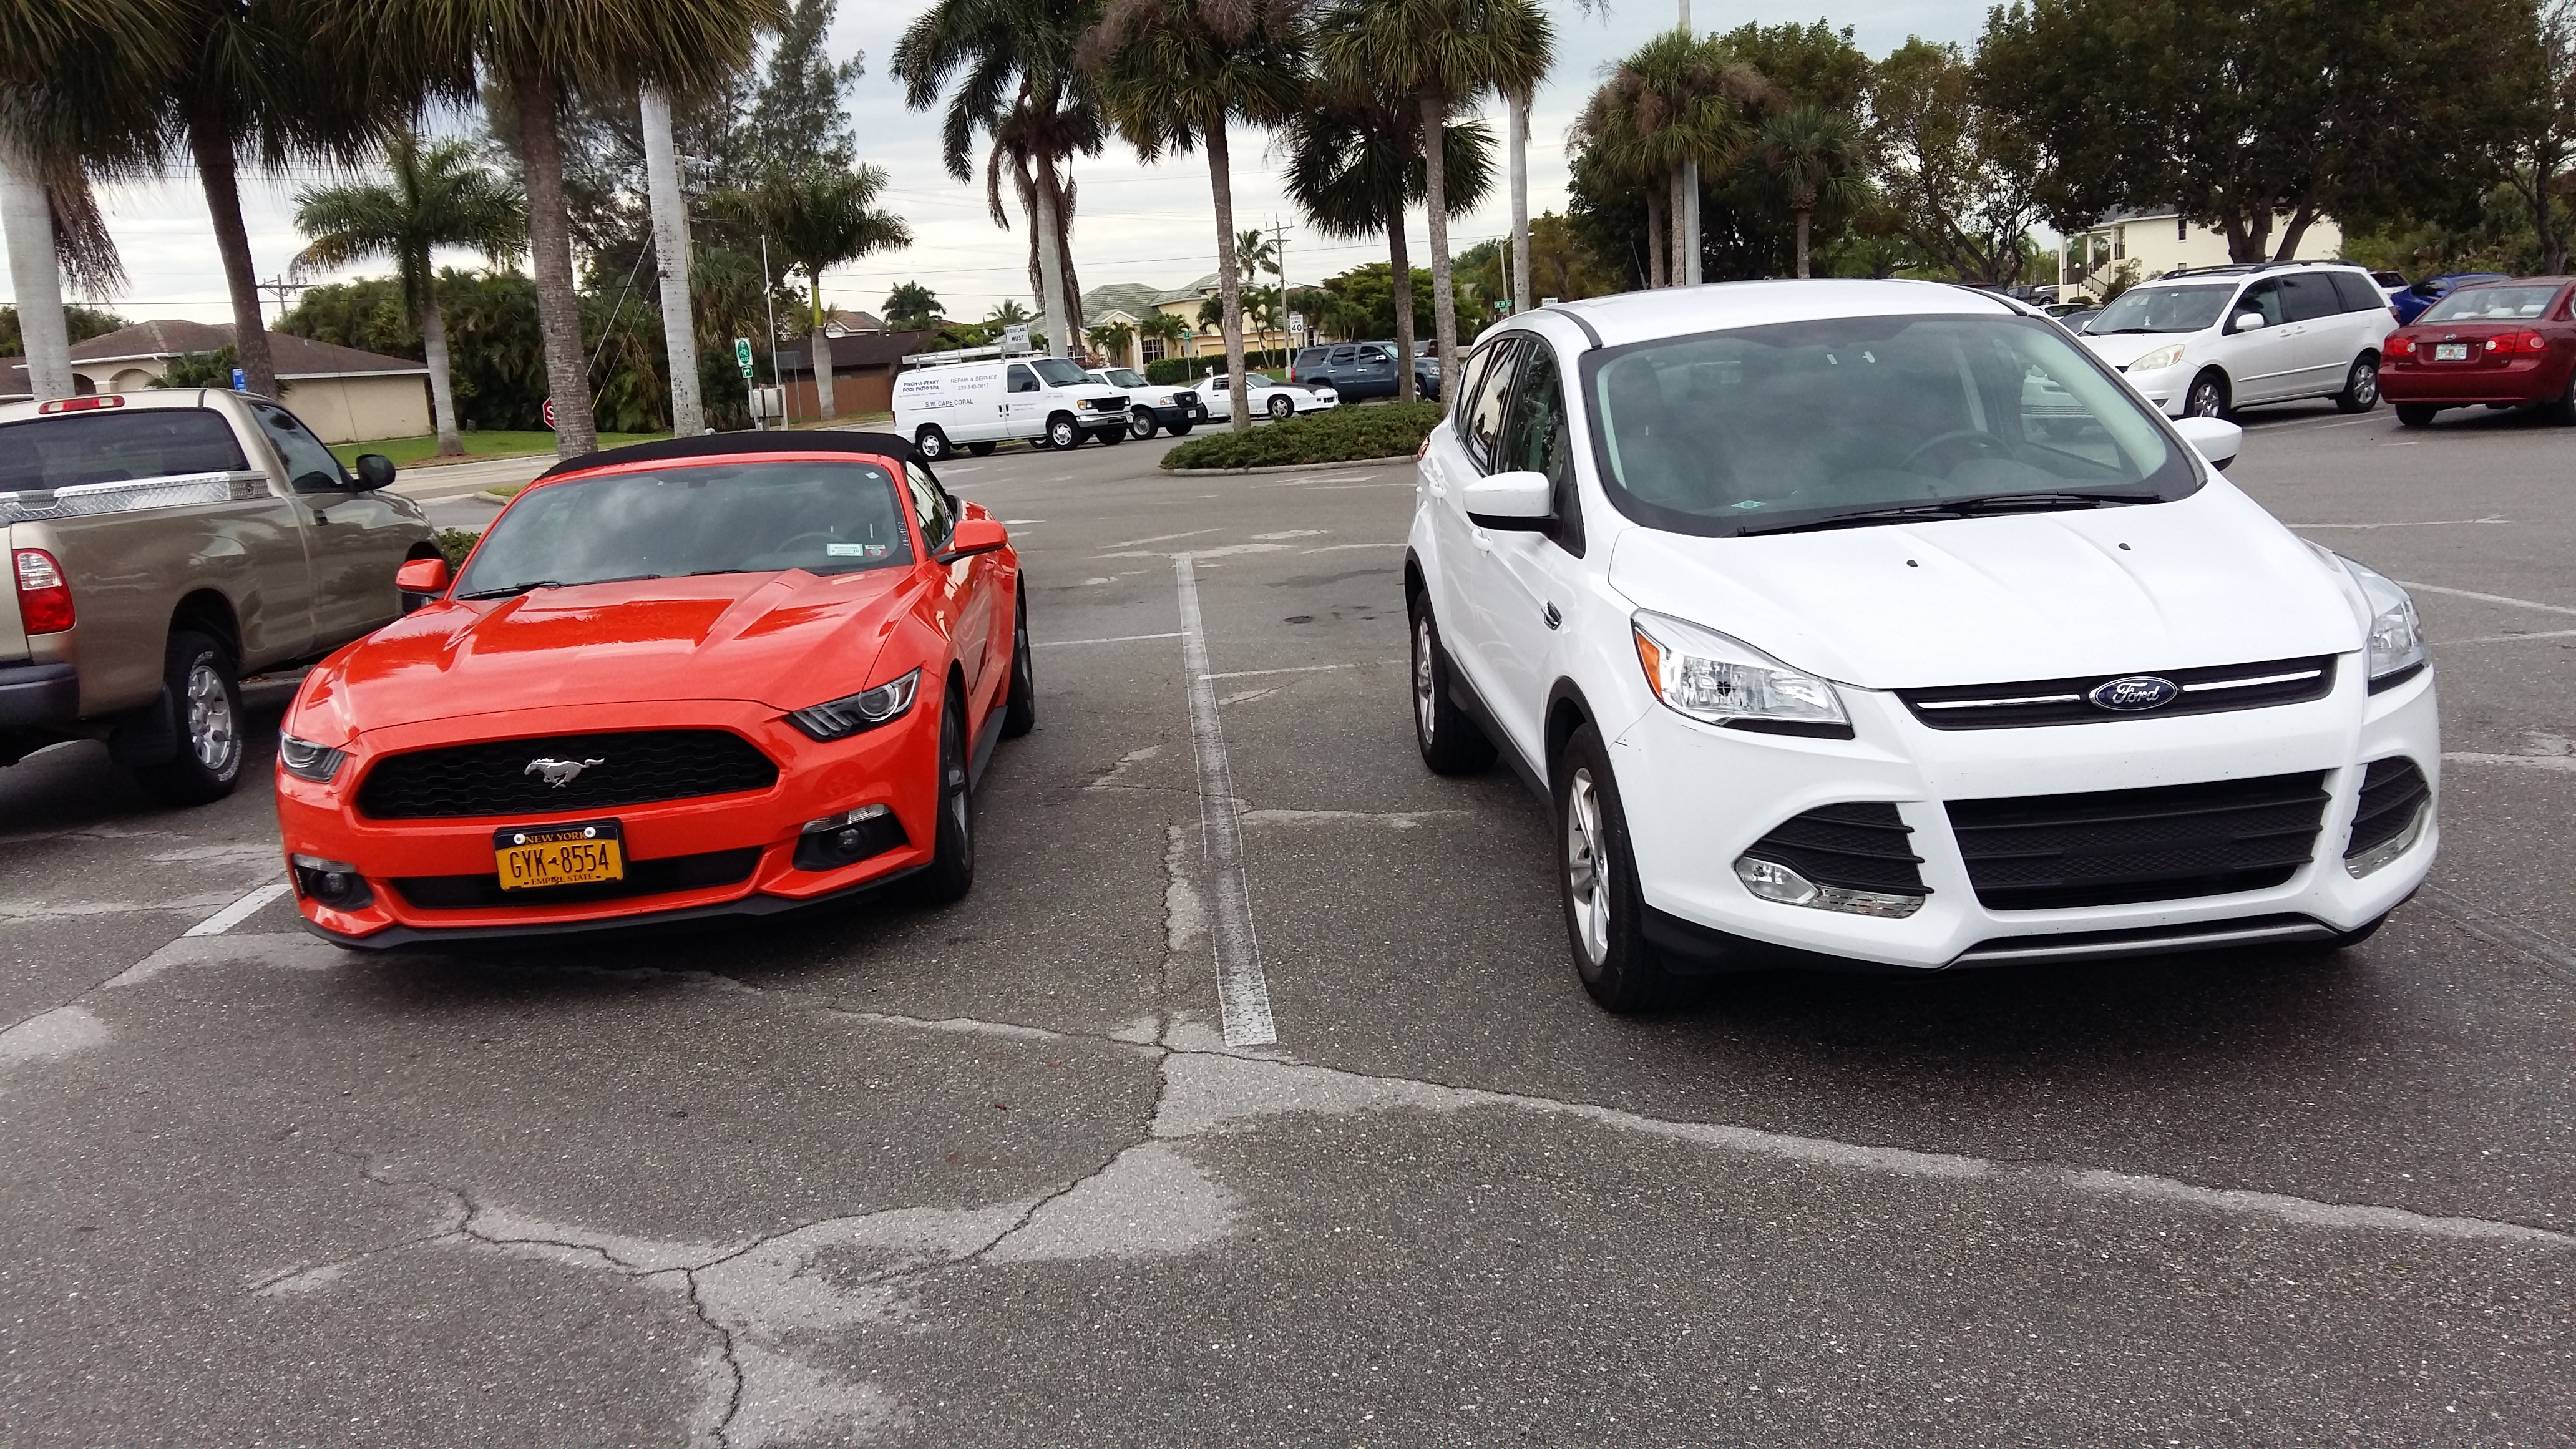 picture of 2 american cars.